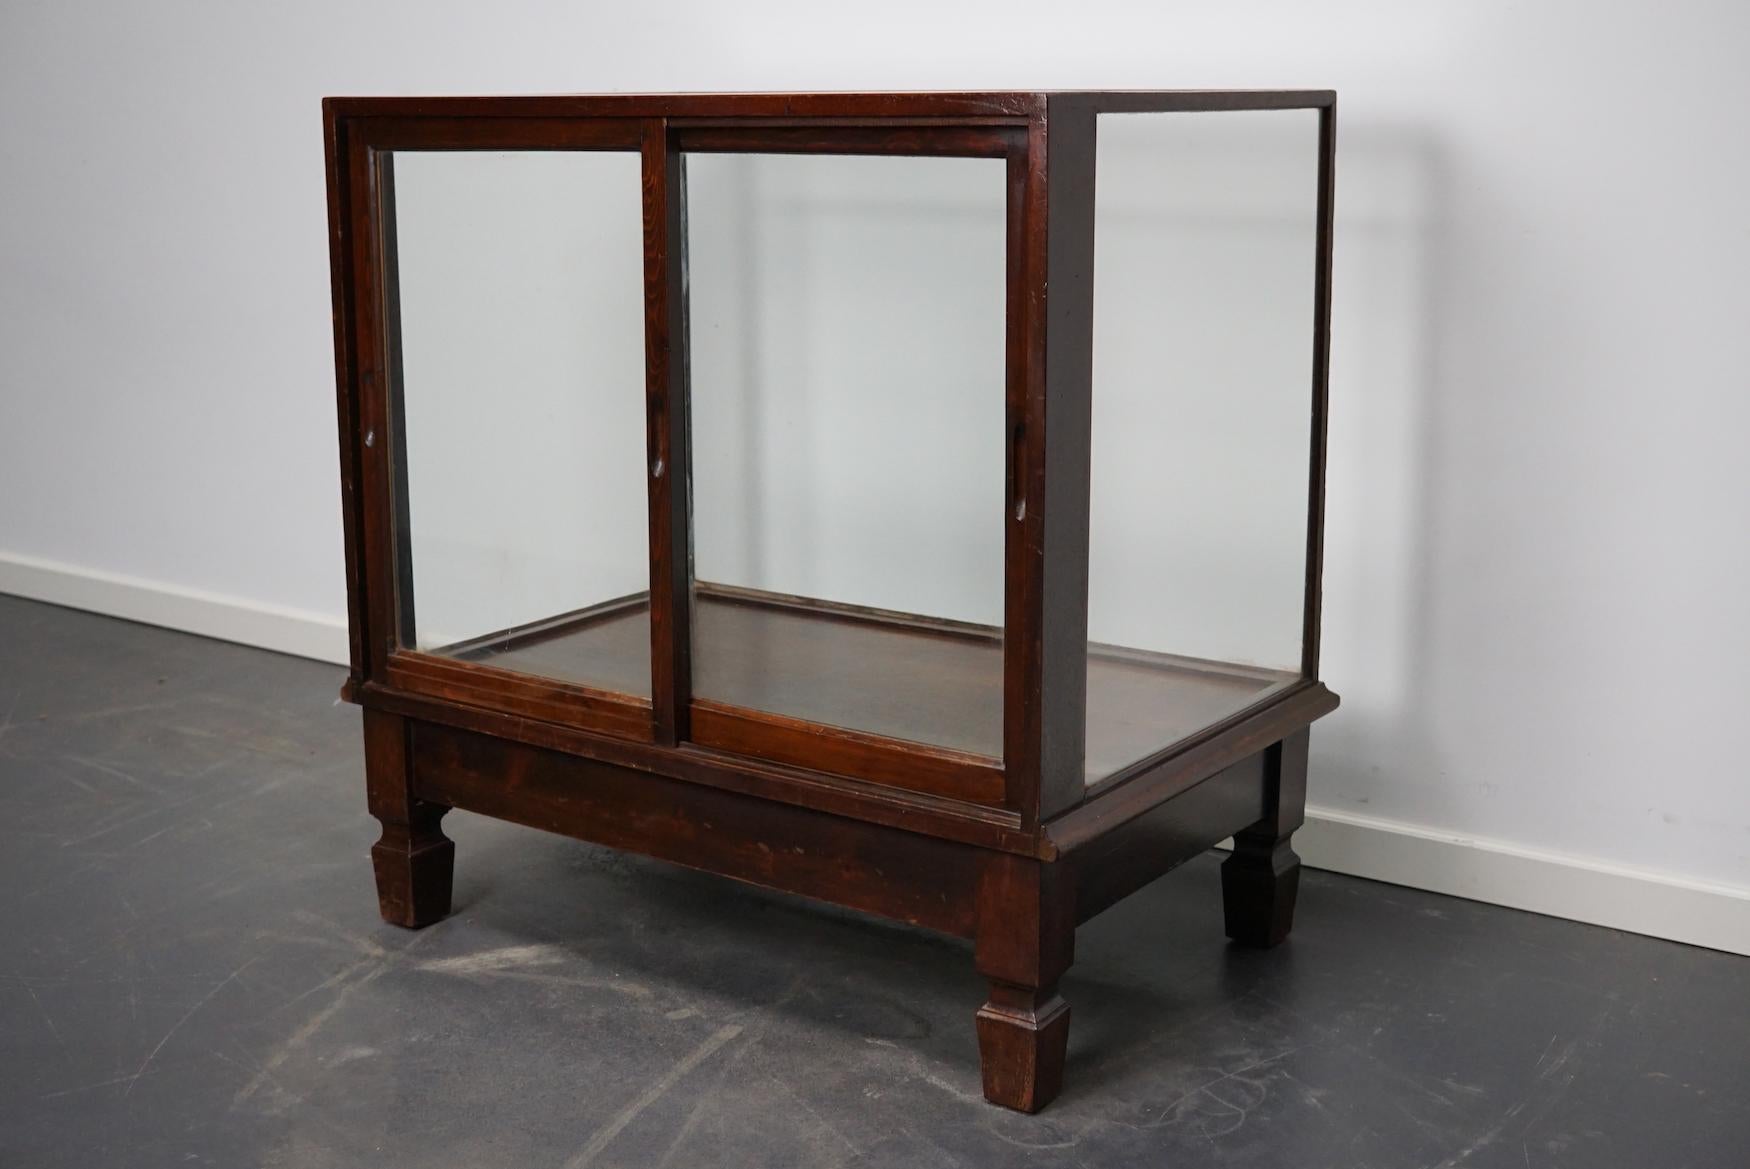 This mahogany and pine vitrine was made circa 1920s in England and probably used in a shop. It features a solid wooden frame with glass sides, top and sliding doors.